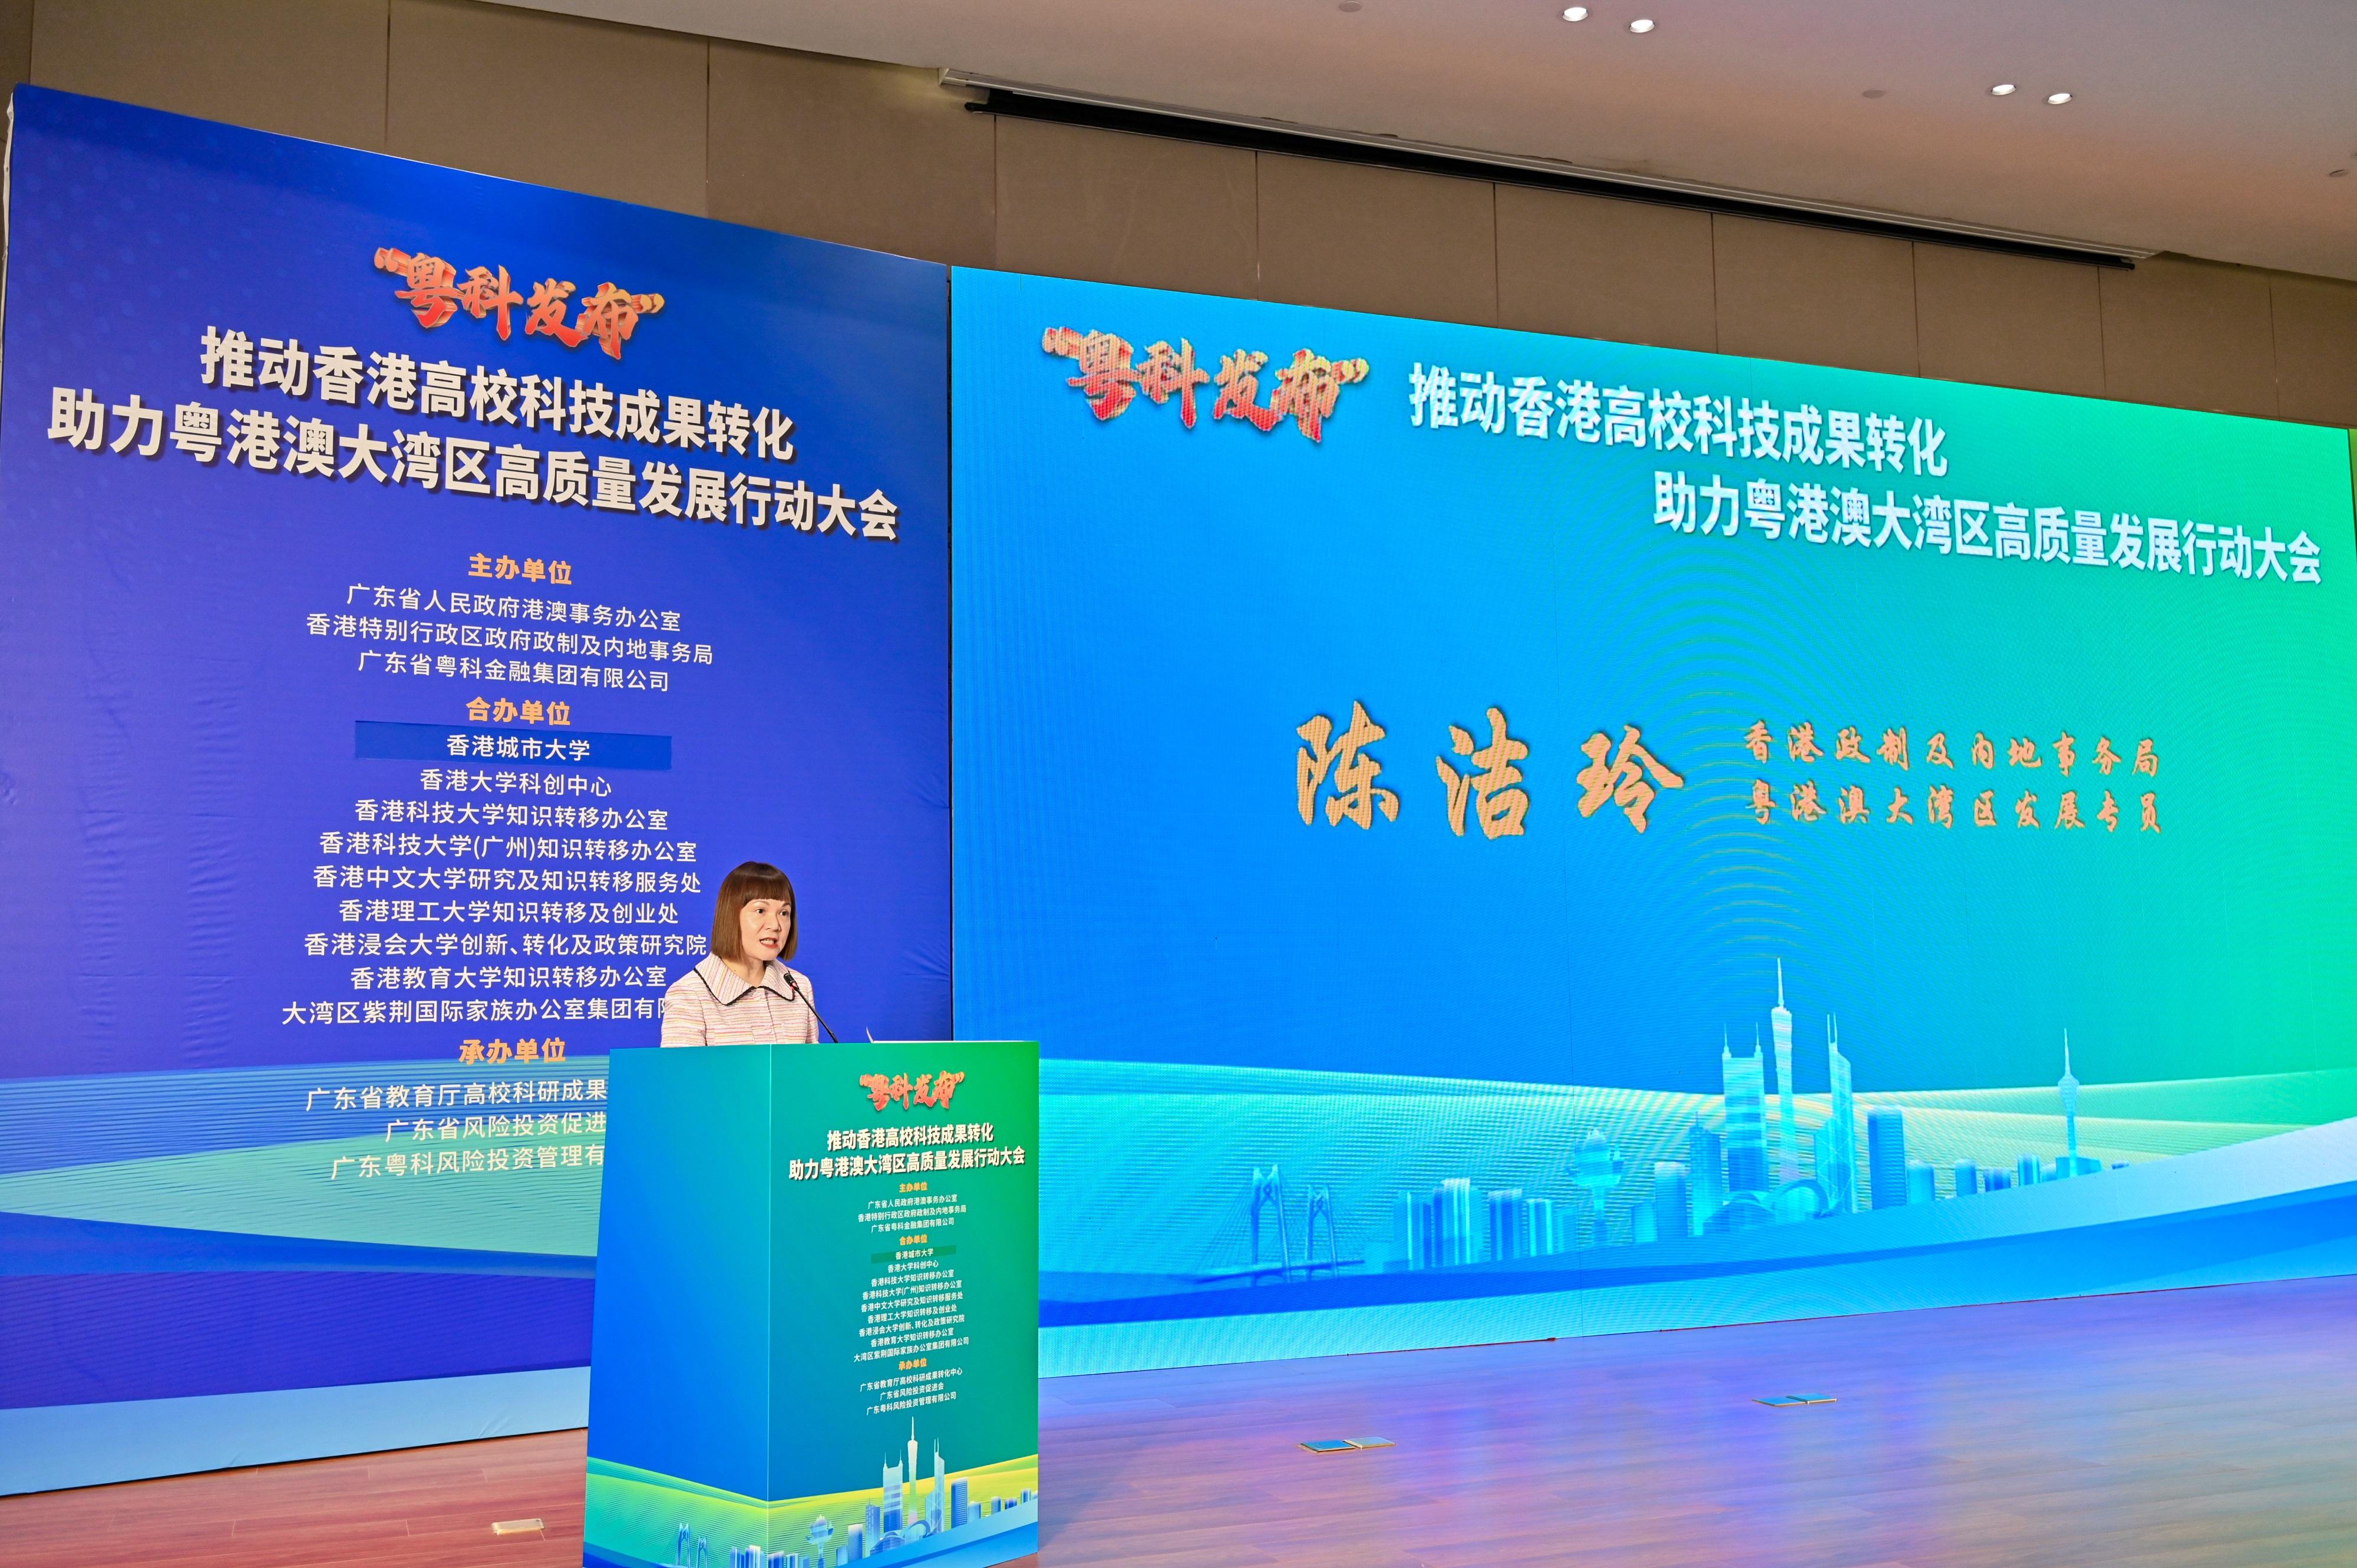 The Commissioner for the Development of the Guangdong-Hong Kong-Macao Greater Bay Area, Ms Maisie Chan, speaks at a conference to promote the transformation of scientific and technological achievements of Hong Kong tertiary institutions and support the high-quality development of the Guangdong-Hong Kong-Macao Greater Bay Area in Guangzhou today (May 17).

